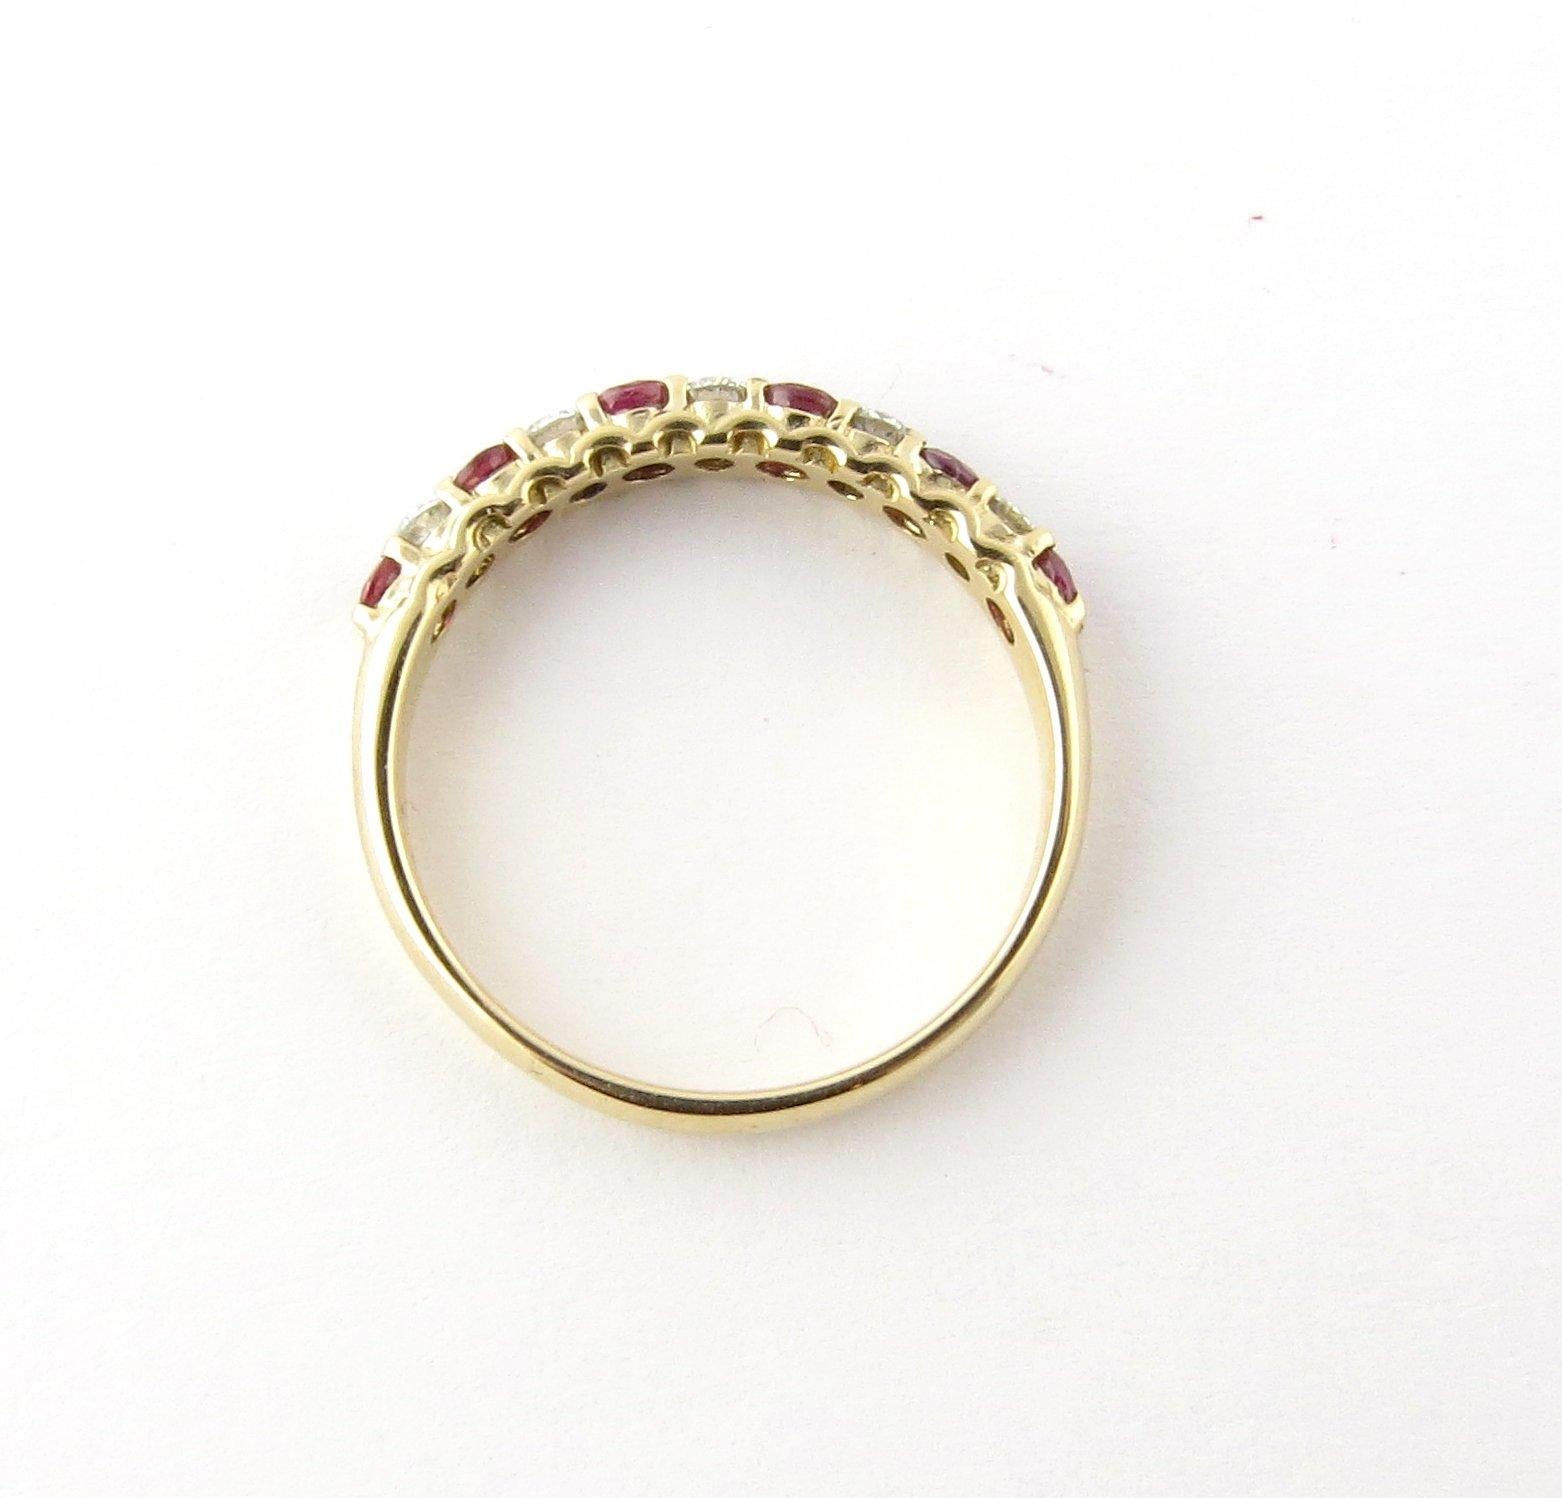 Vintage 14 Karat Yellow Gold Ruby and Diamond Ring Size 6.25

This stunning ring features five round brilliant cut diamonds and six round rubies set in meticulously detailed 14K yellow gold. Shank measures 2 mm.

Approximate total diamond weight: